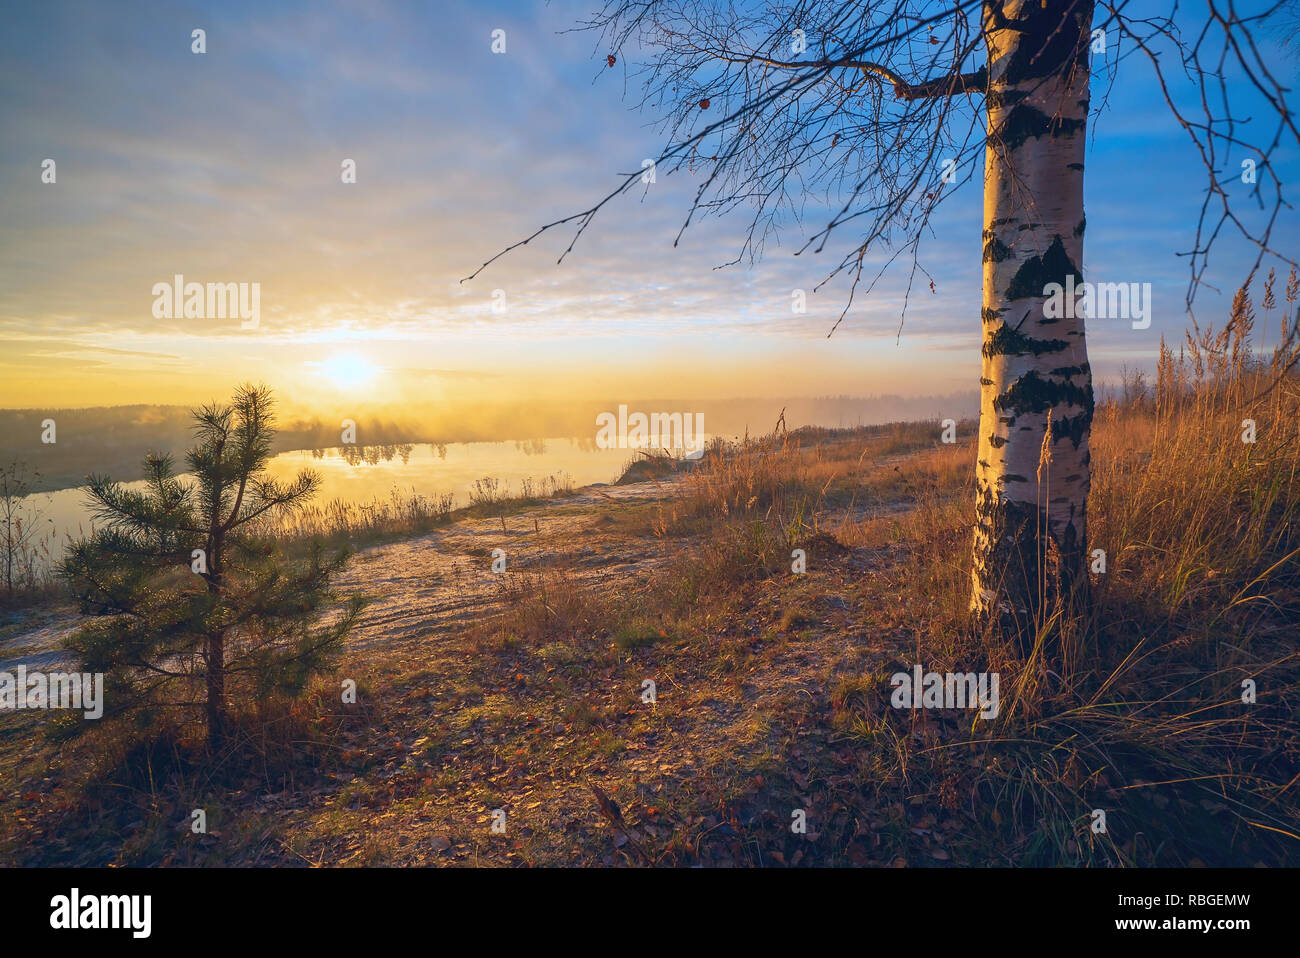 Birch and pine trees at sunset by lake. Stock Photo